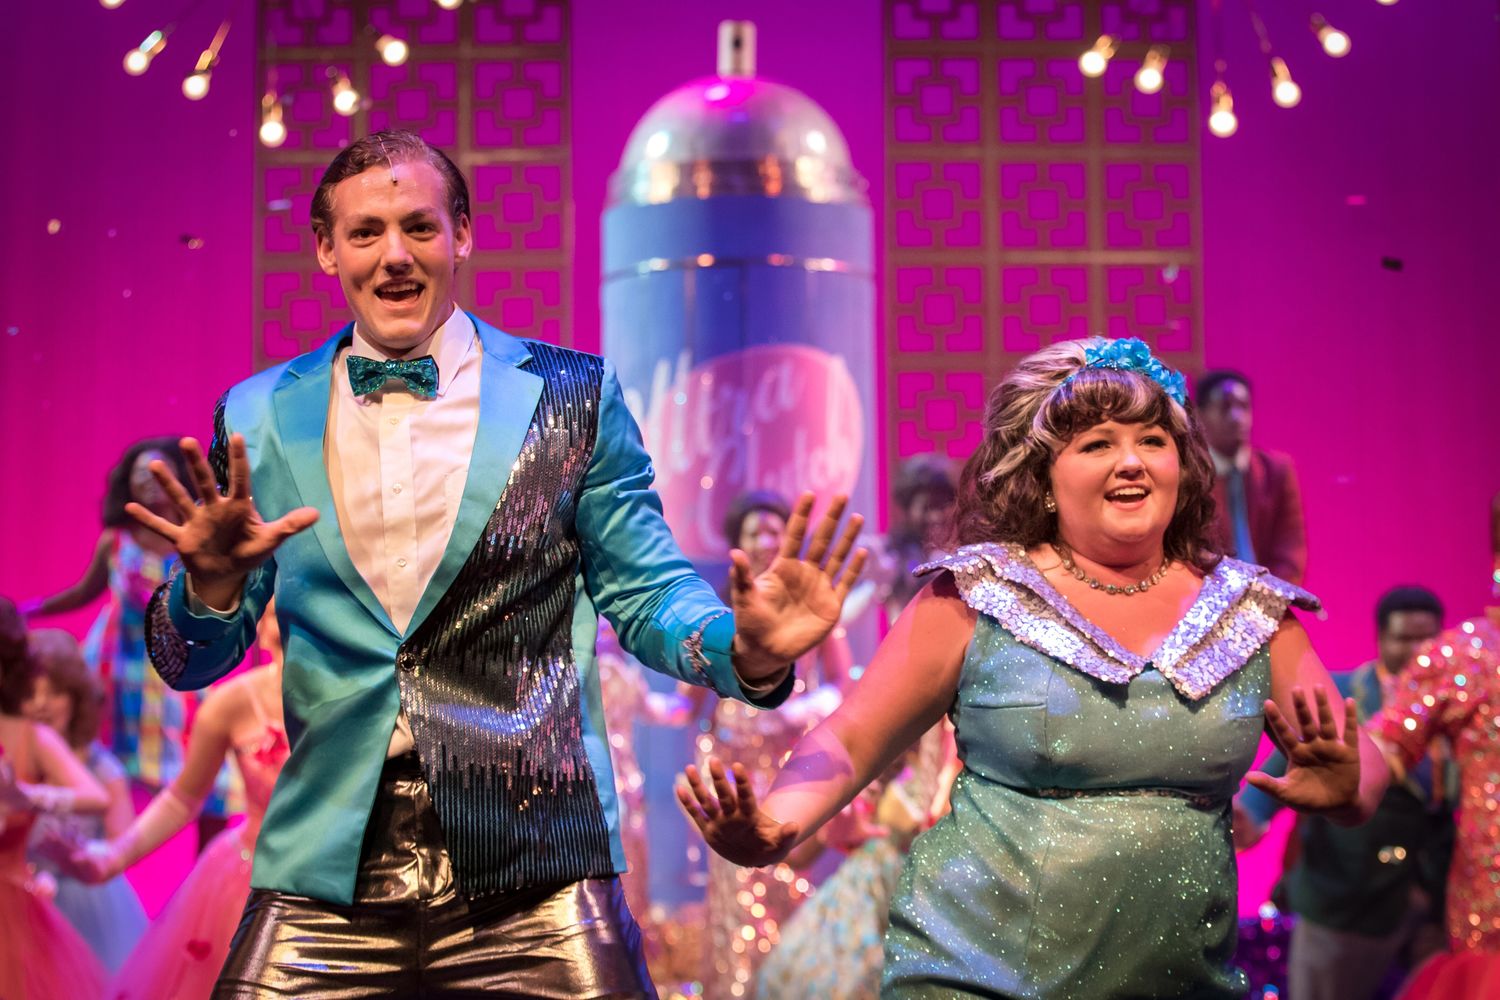 Timothy Marsh (l) as Link Larson and Erica Peninger portrays Stacy Turnblad, the ever-positive voice for social change and dancing her way into popularity, in the Theatre Memphis musical production of Hairspray in the Lohrey Theatre, June 7 ? 30, 2019. 1